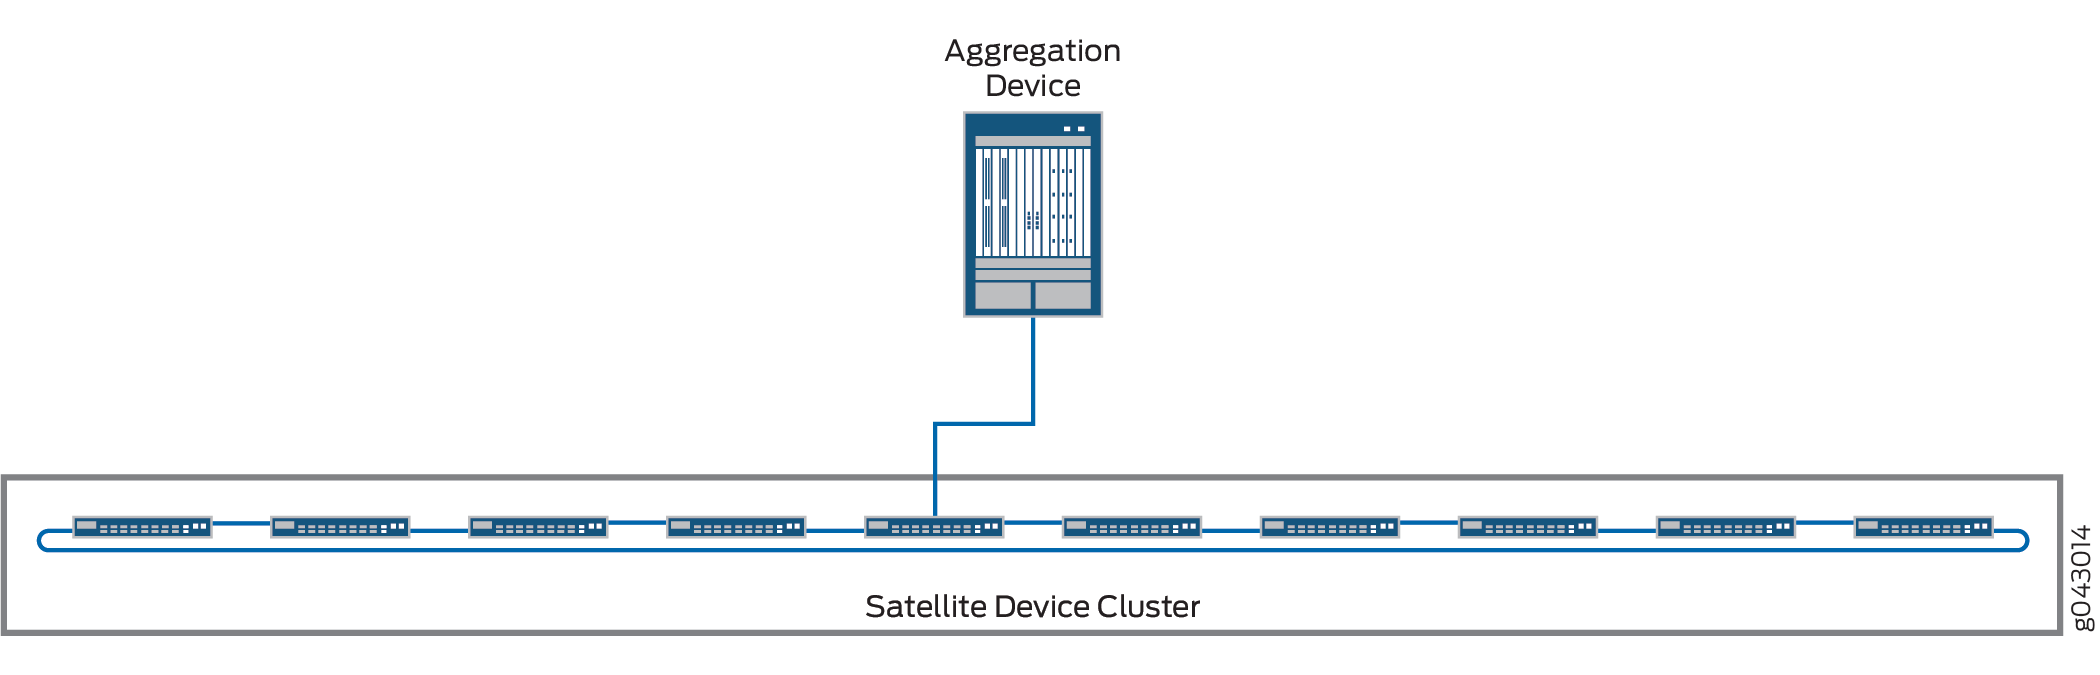 Satellite Device Cluster Topology